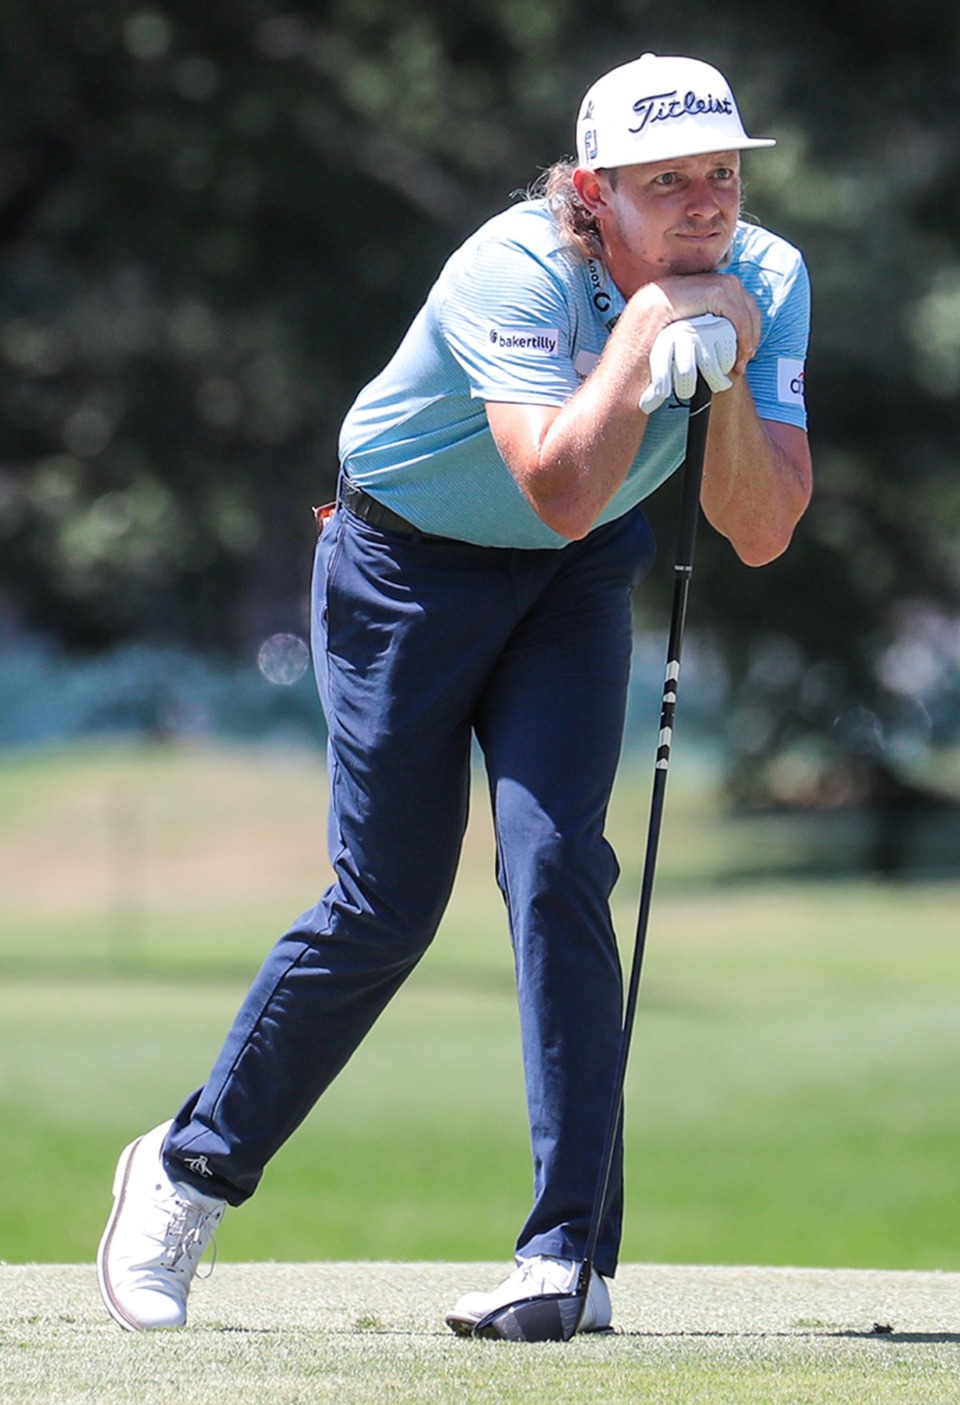 <strong>Cam Smith watches an errant tee shot in disappointment of the 7th hole of the FedEx St. Jude Championship at TPC Southwind Aug. 13, 2022</strong>. (Patrick Lantrip/Daily Memphian)